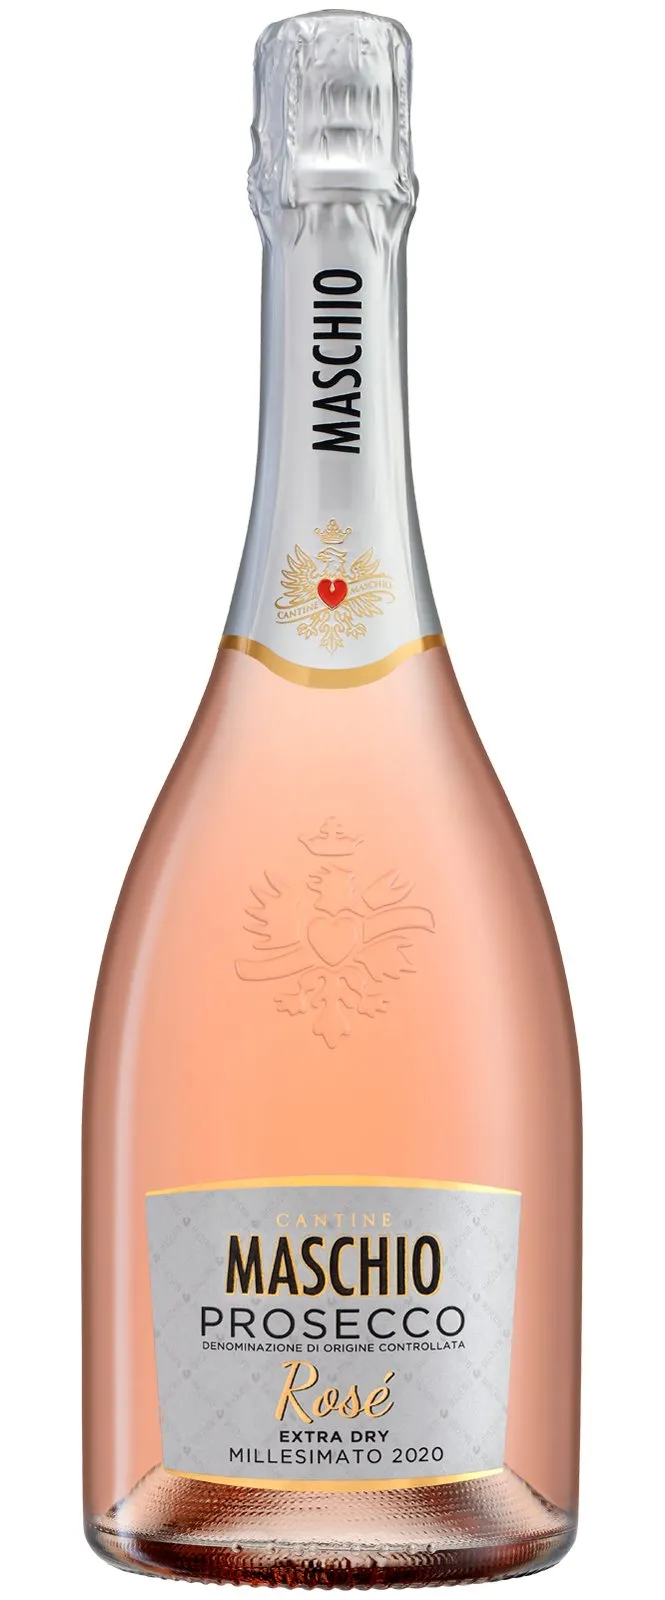 Bottle of Maschio Extra Dry Roséwith label visible